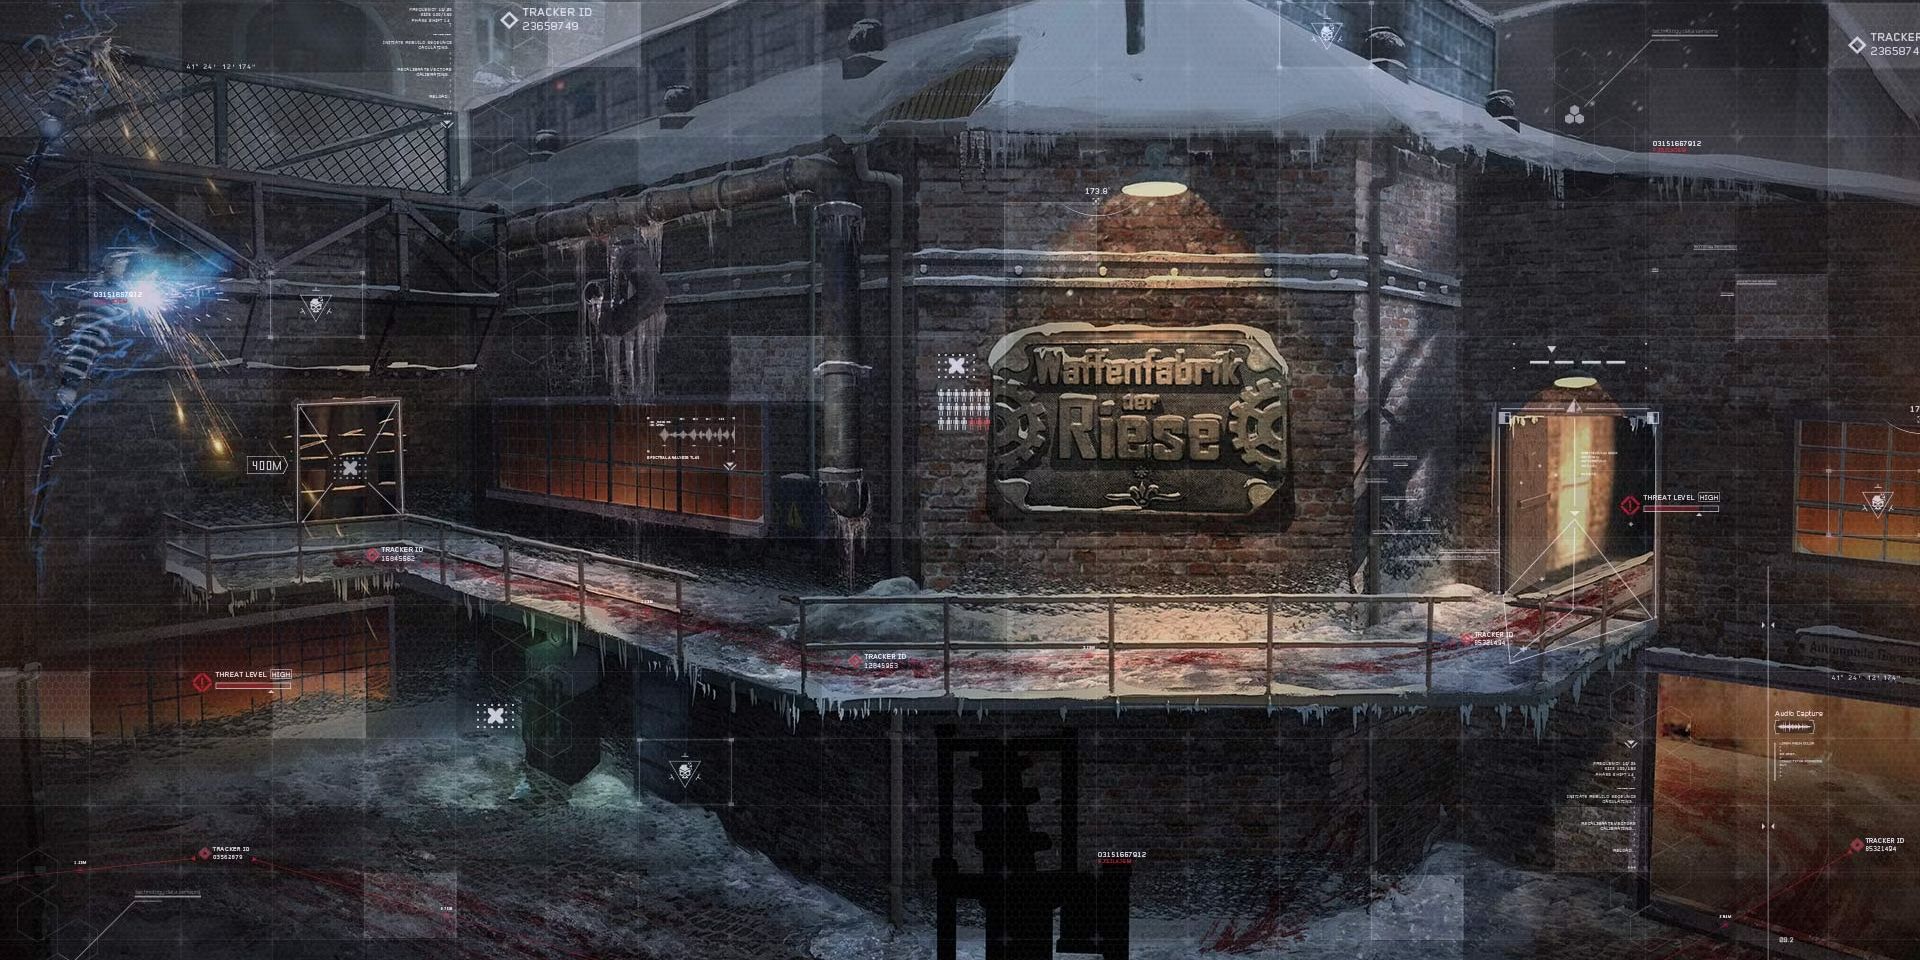 Exterior of building labeled Waffenfabrik Der Riese from the Der Riese zombies map from Call of Duty Black Ops 3.